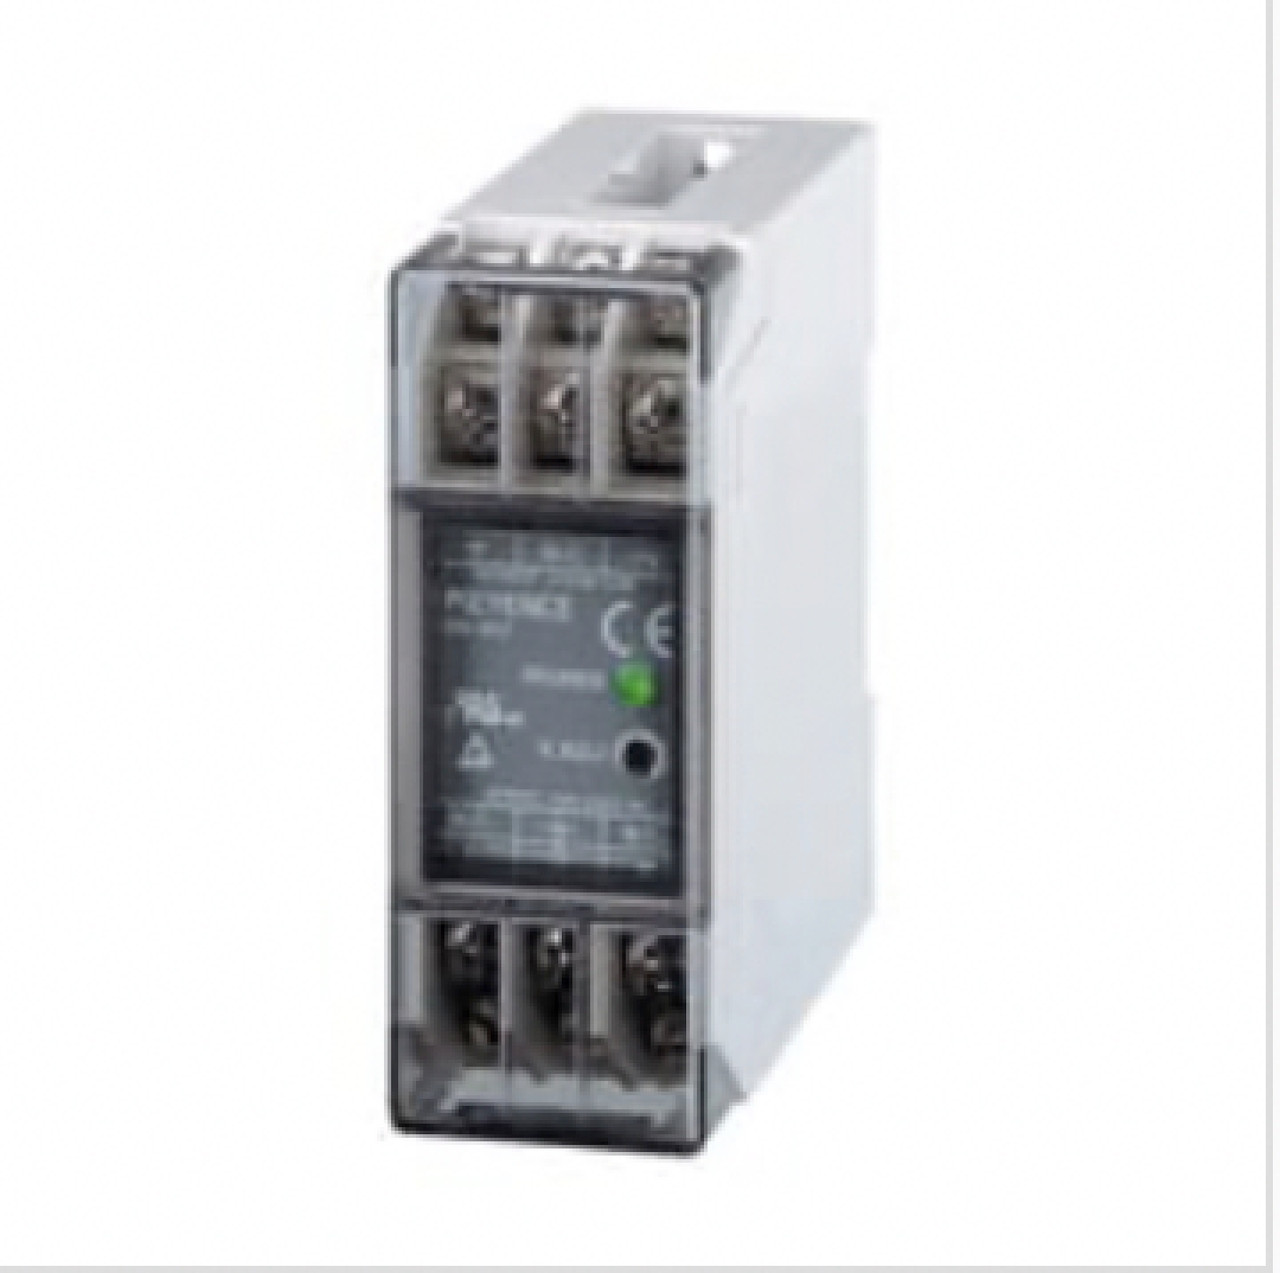 Keyence MS-E07 Compact Switching Power Supply, Output Current 1.5 A, 5-V Type [Refurbished]